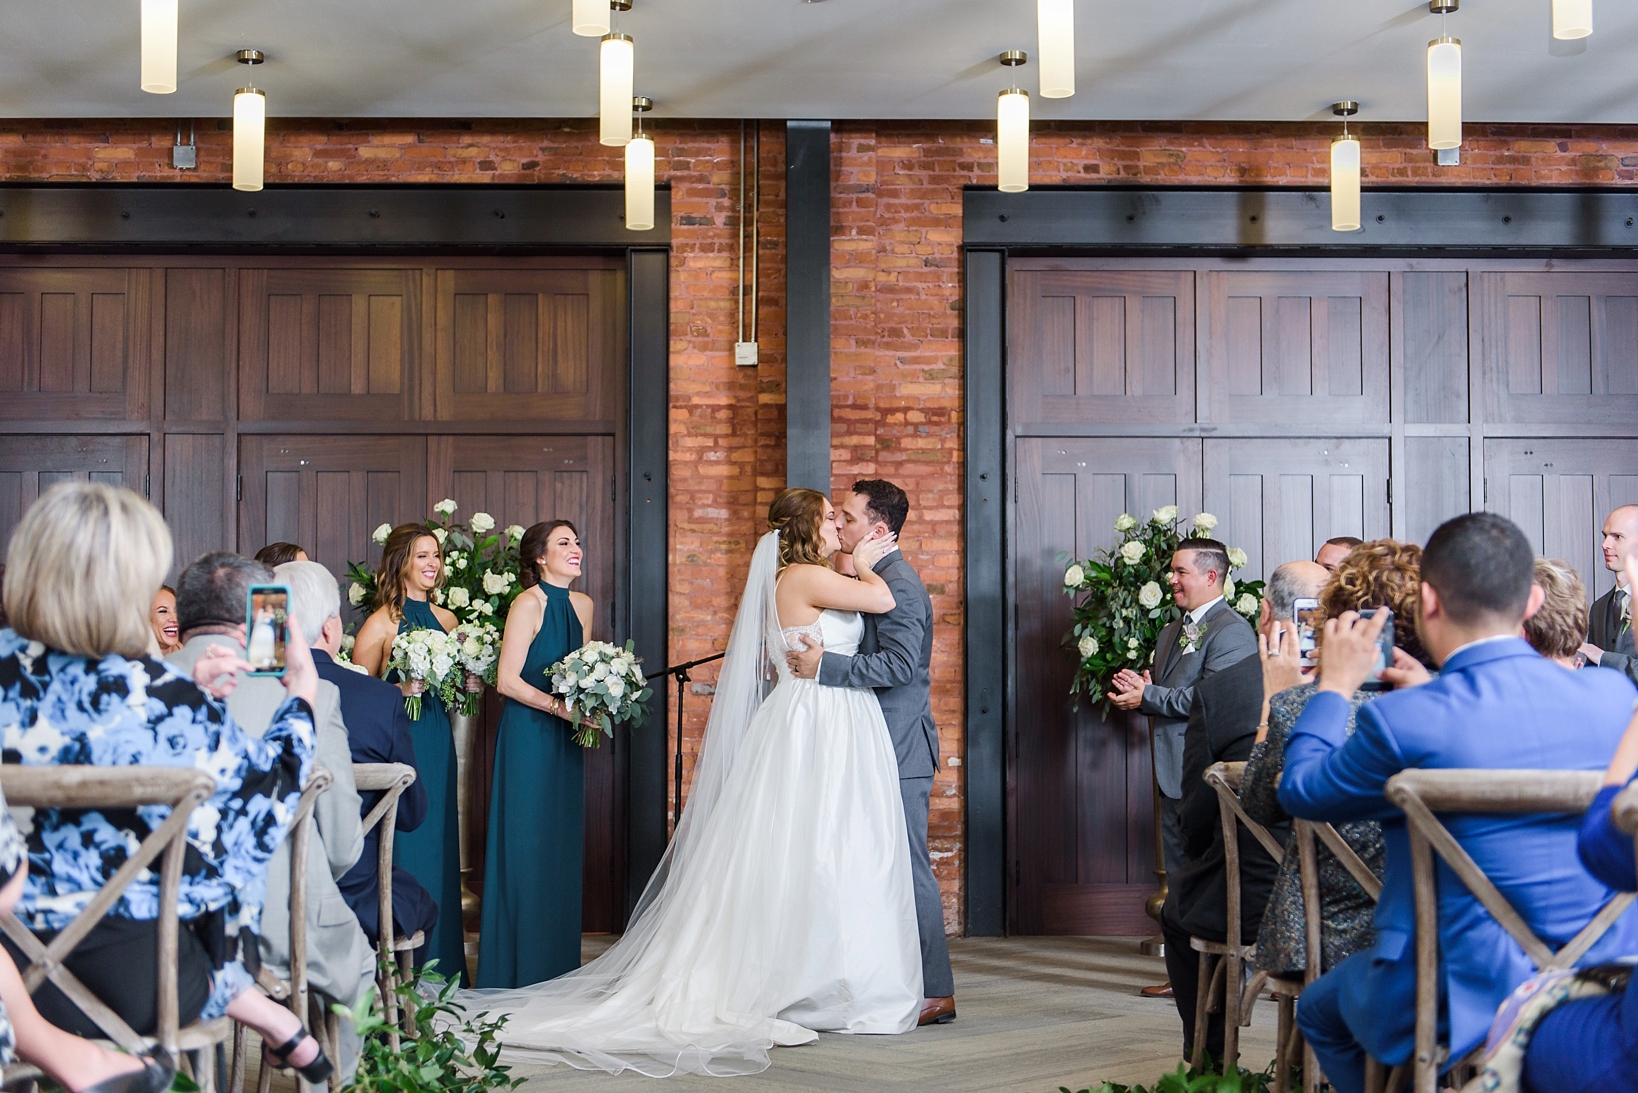 The first kiss between the bride and groom by Sarah & Ben Photography